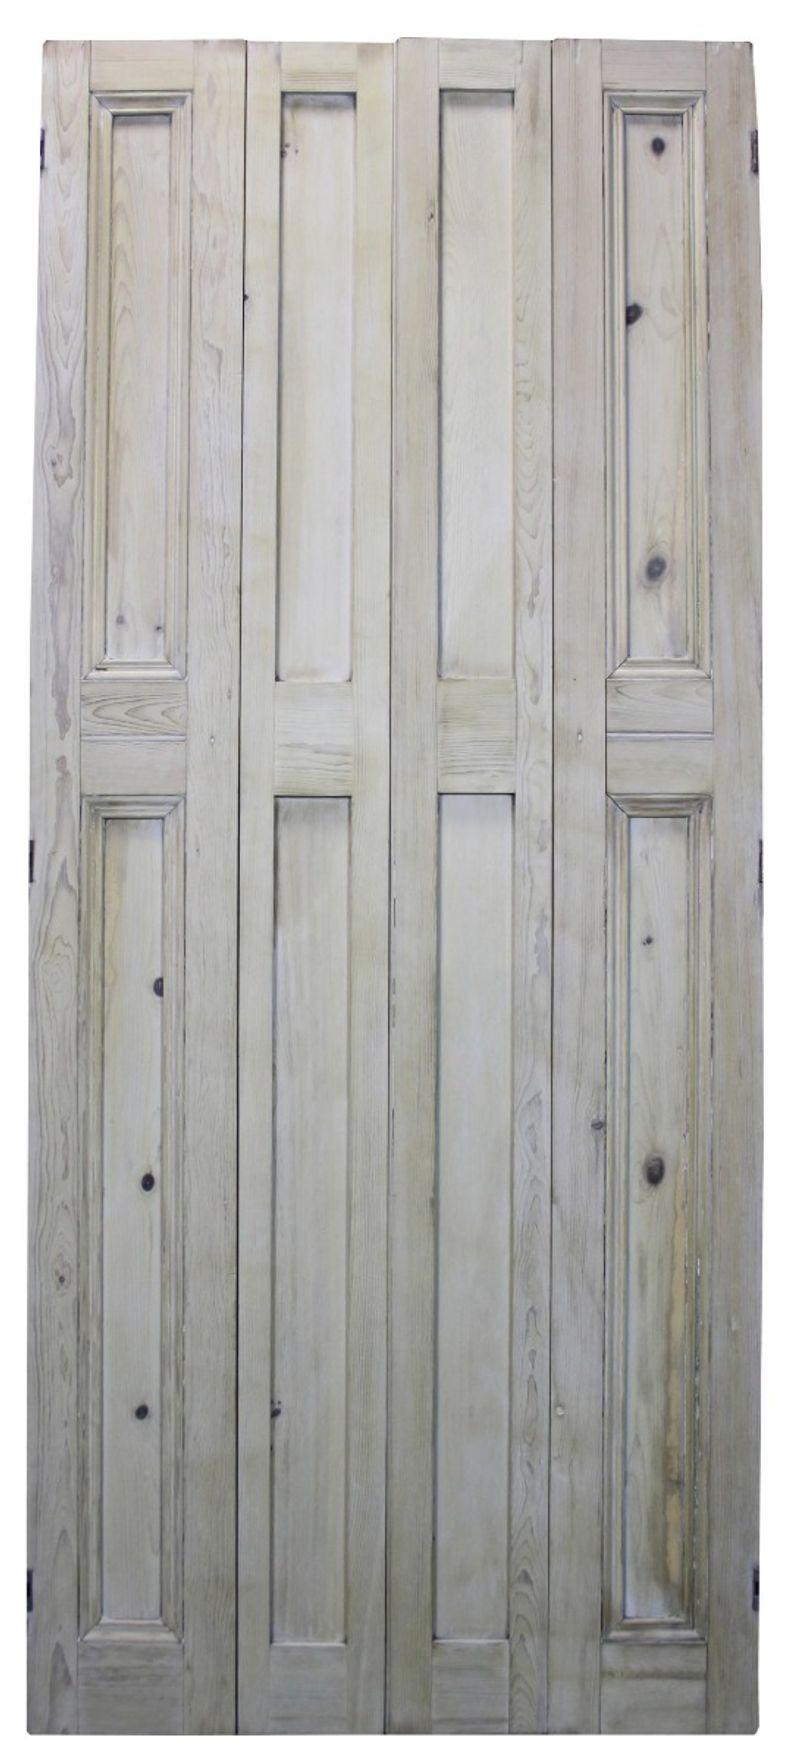 A set of salvaged pine window shutters
 
Additional Dimensions:
 
Width 112-115 cm (sides cut to an angle).